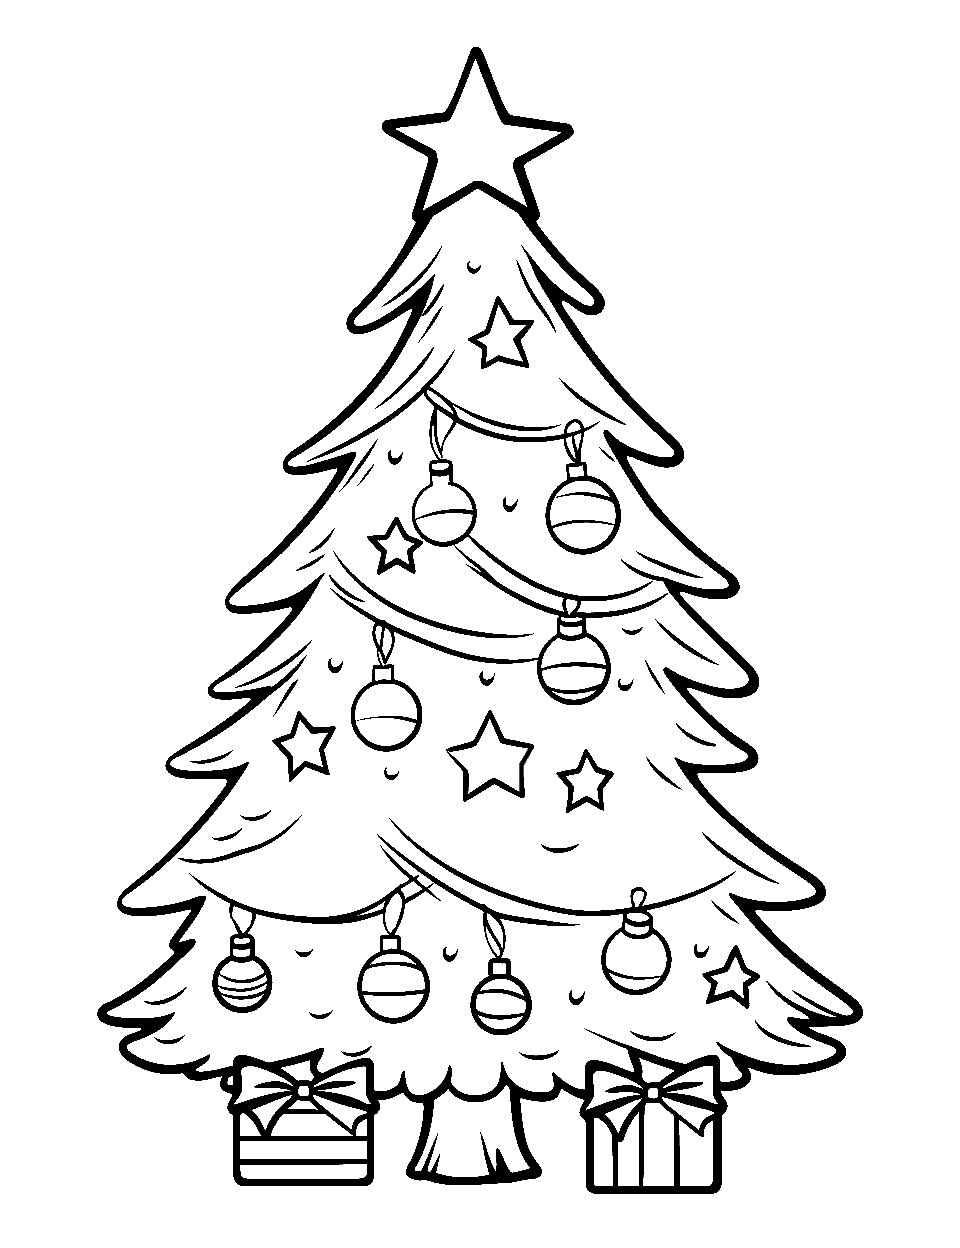 Simple Christmas Tree for Preschoolers Coloring Page - A delightful and uncomplicated Christmas tree with ornaments suitable for preschoolers.